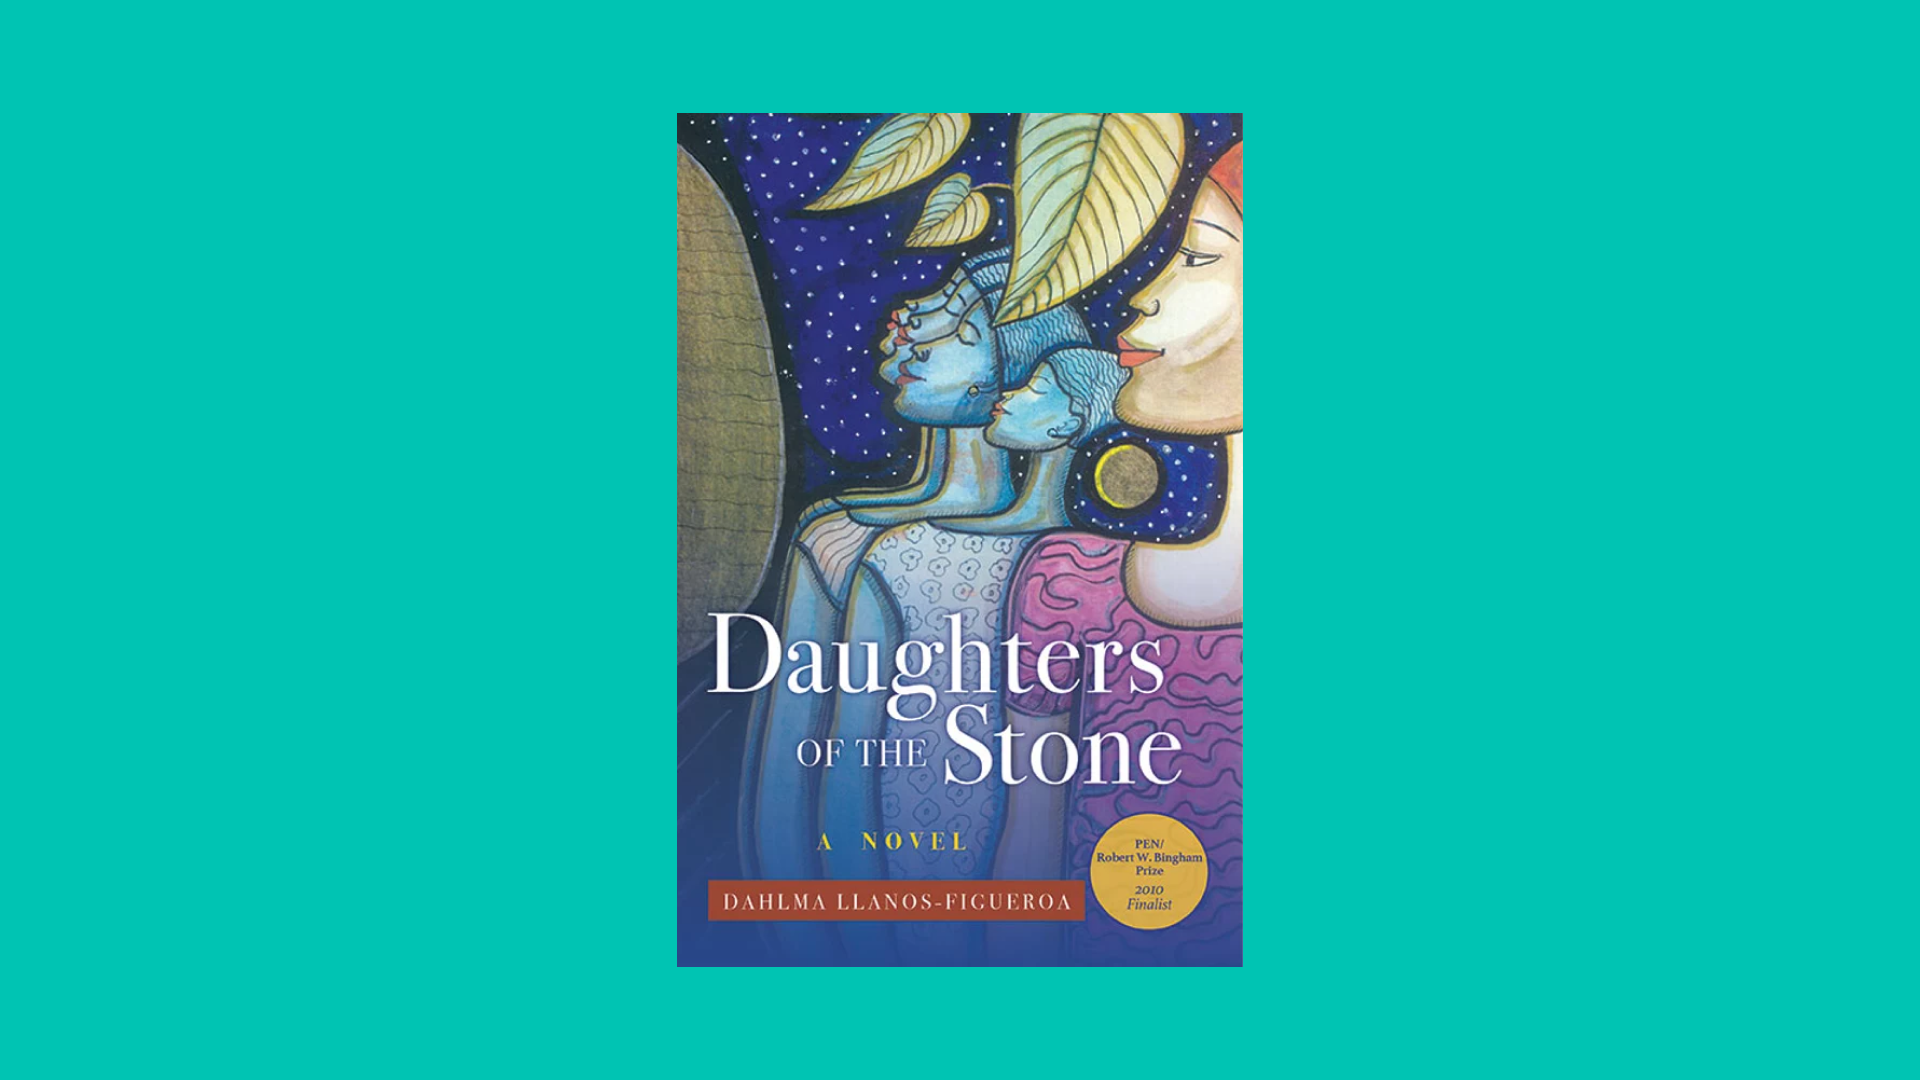 “Daughters of the Stone” by Dahlma Llanos-Figueroa